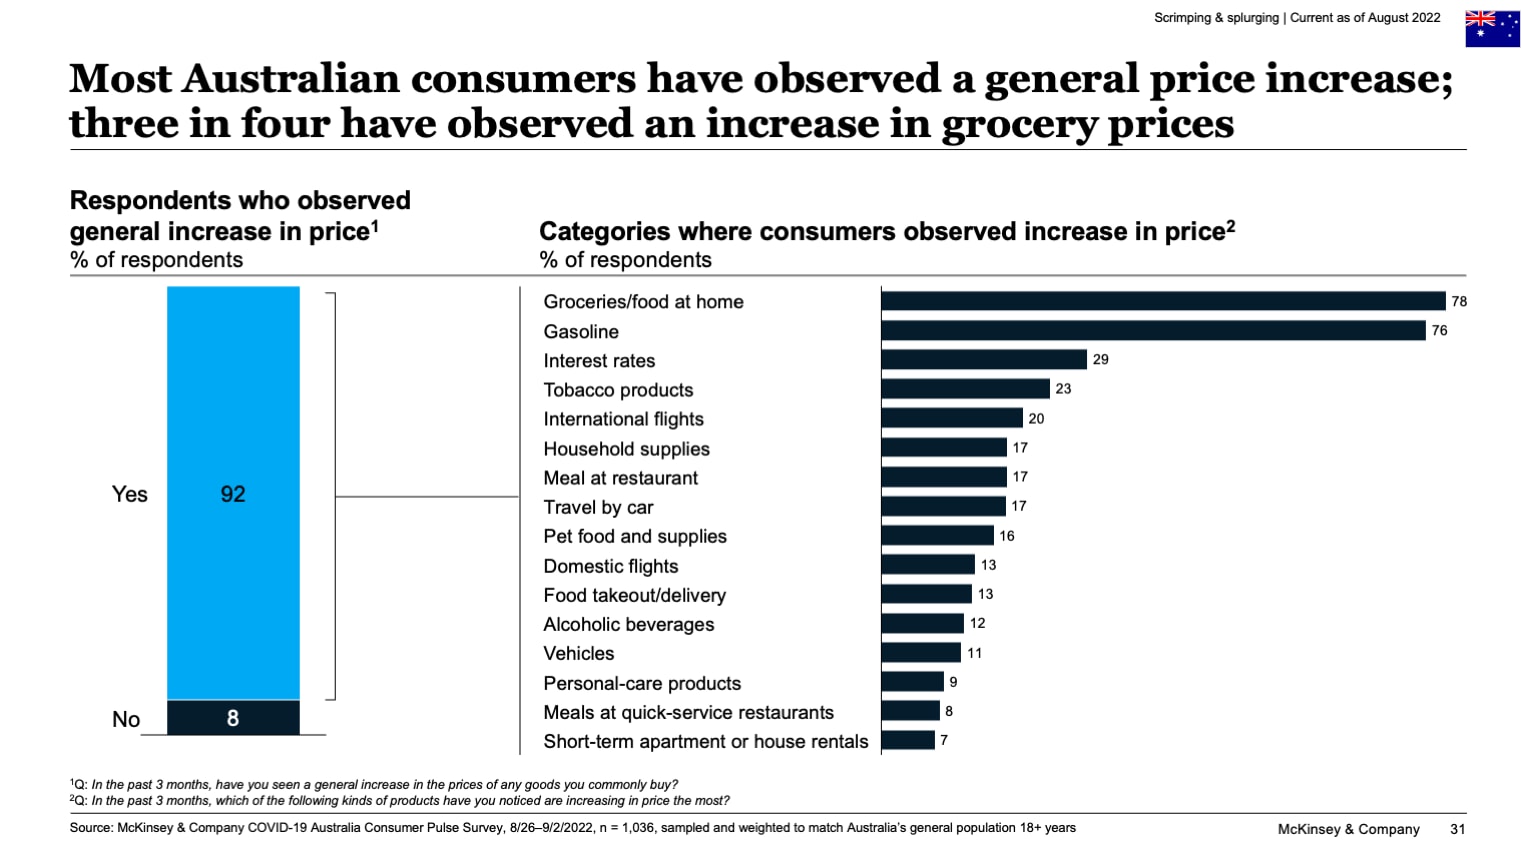 Most Australian consumers have observed a general price increase; three in four have observed an increase in grocery prices